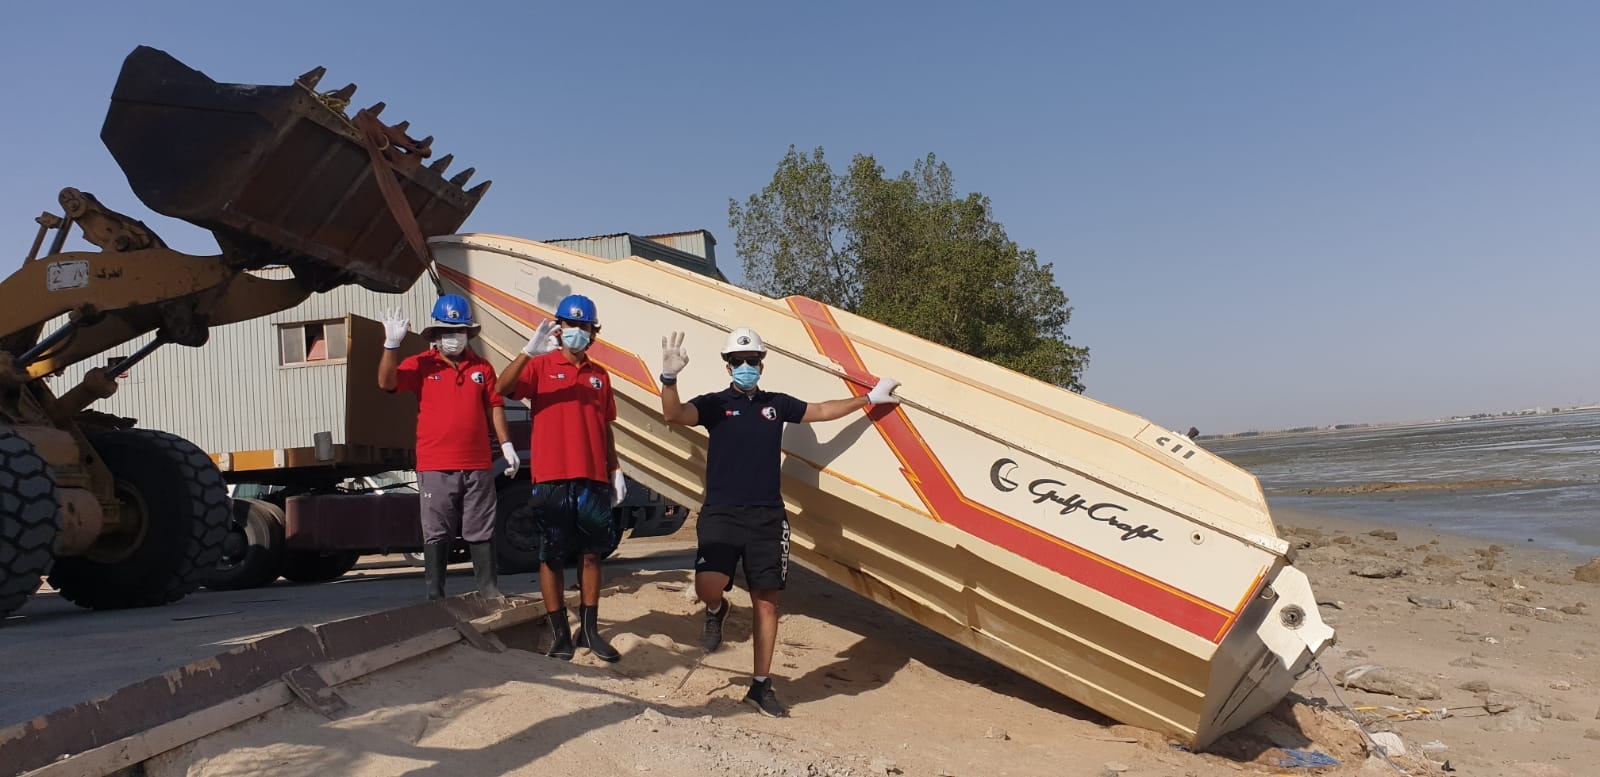 Kuwait Diving Team brought to surface a sunken boat weighing three tons from Oshairej shores